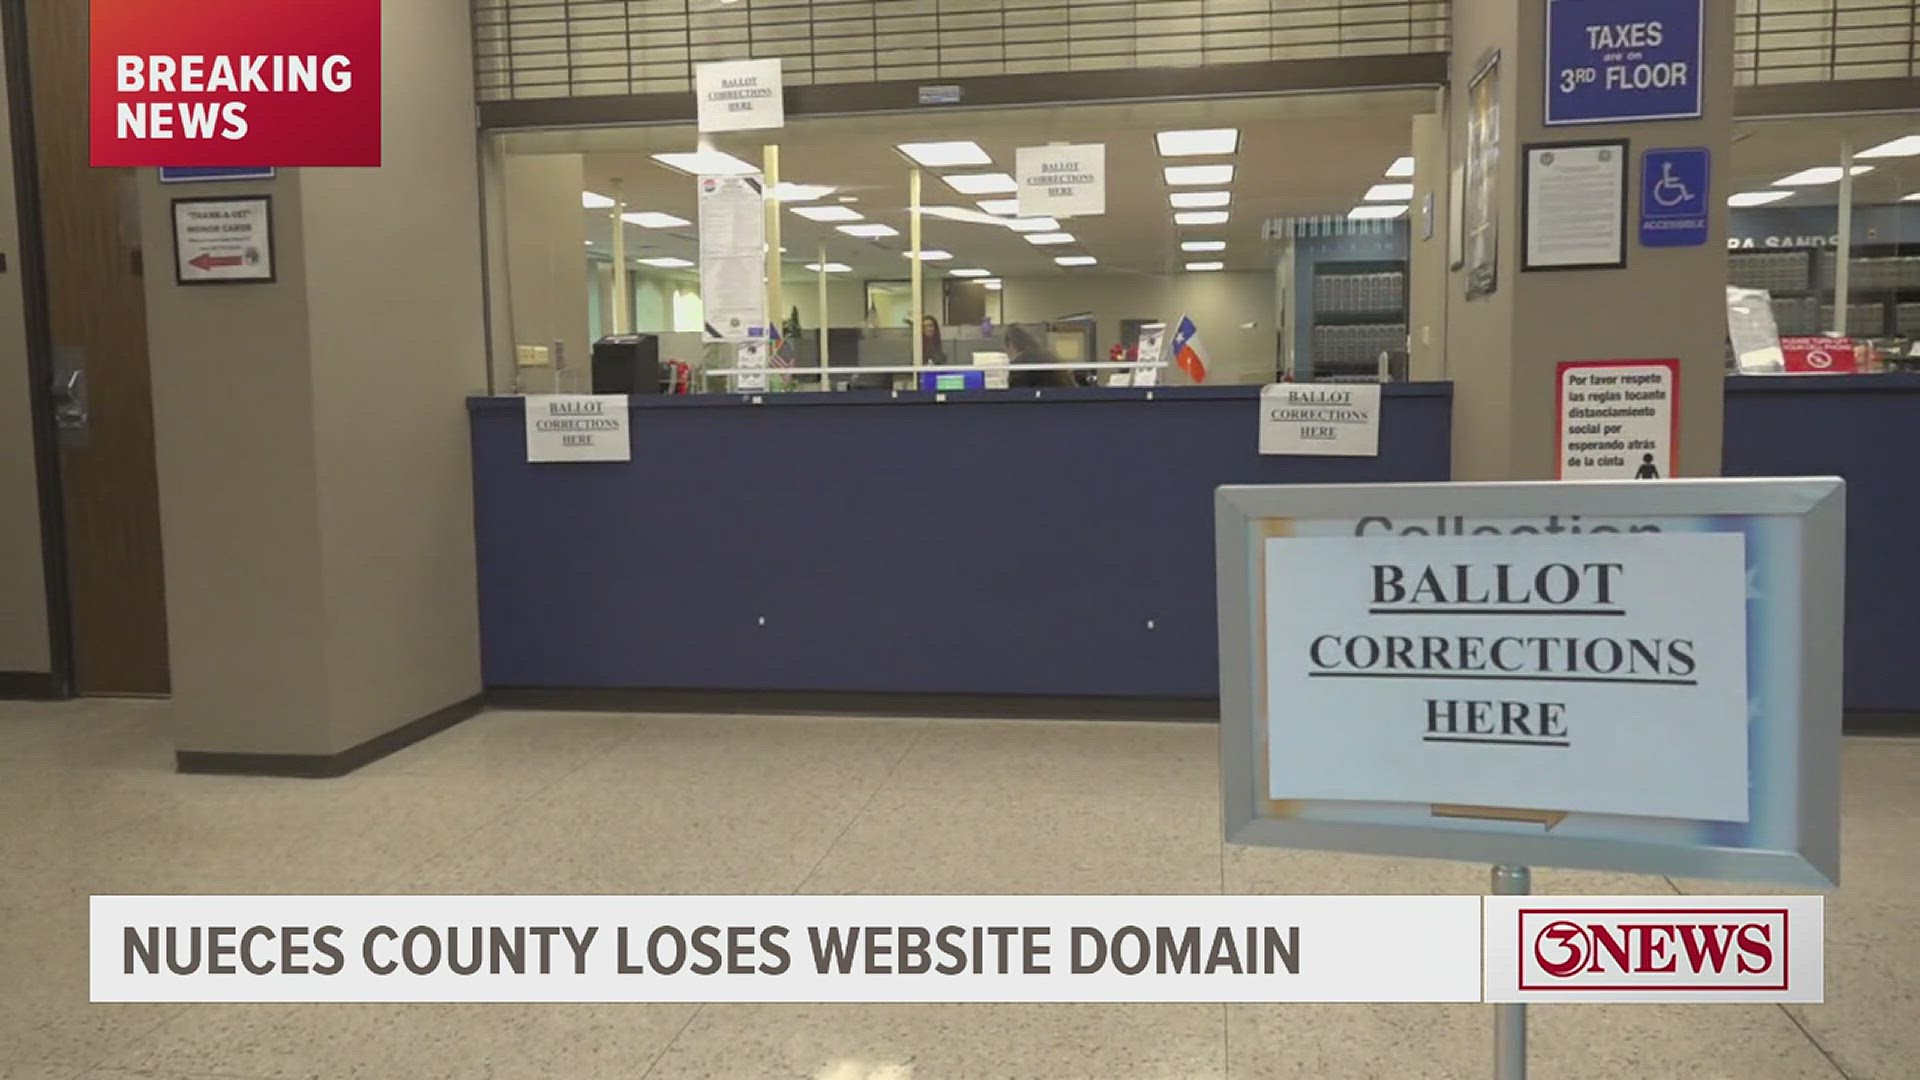 If you tried to access Nueces County's website, you probably got a blank screen which means any online payments or emails Wednesday most likely didn't go through.